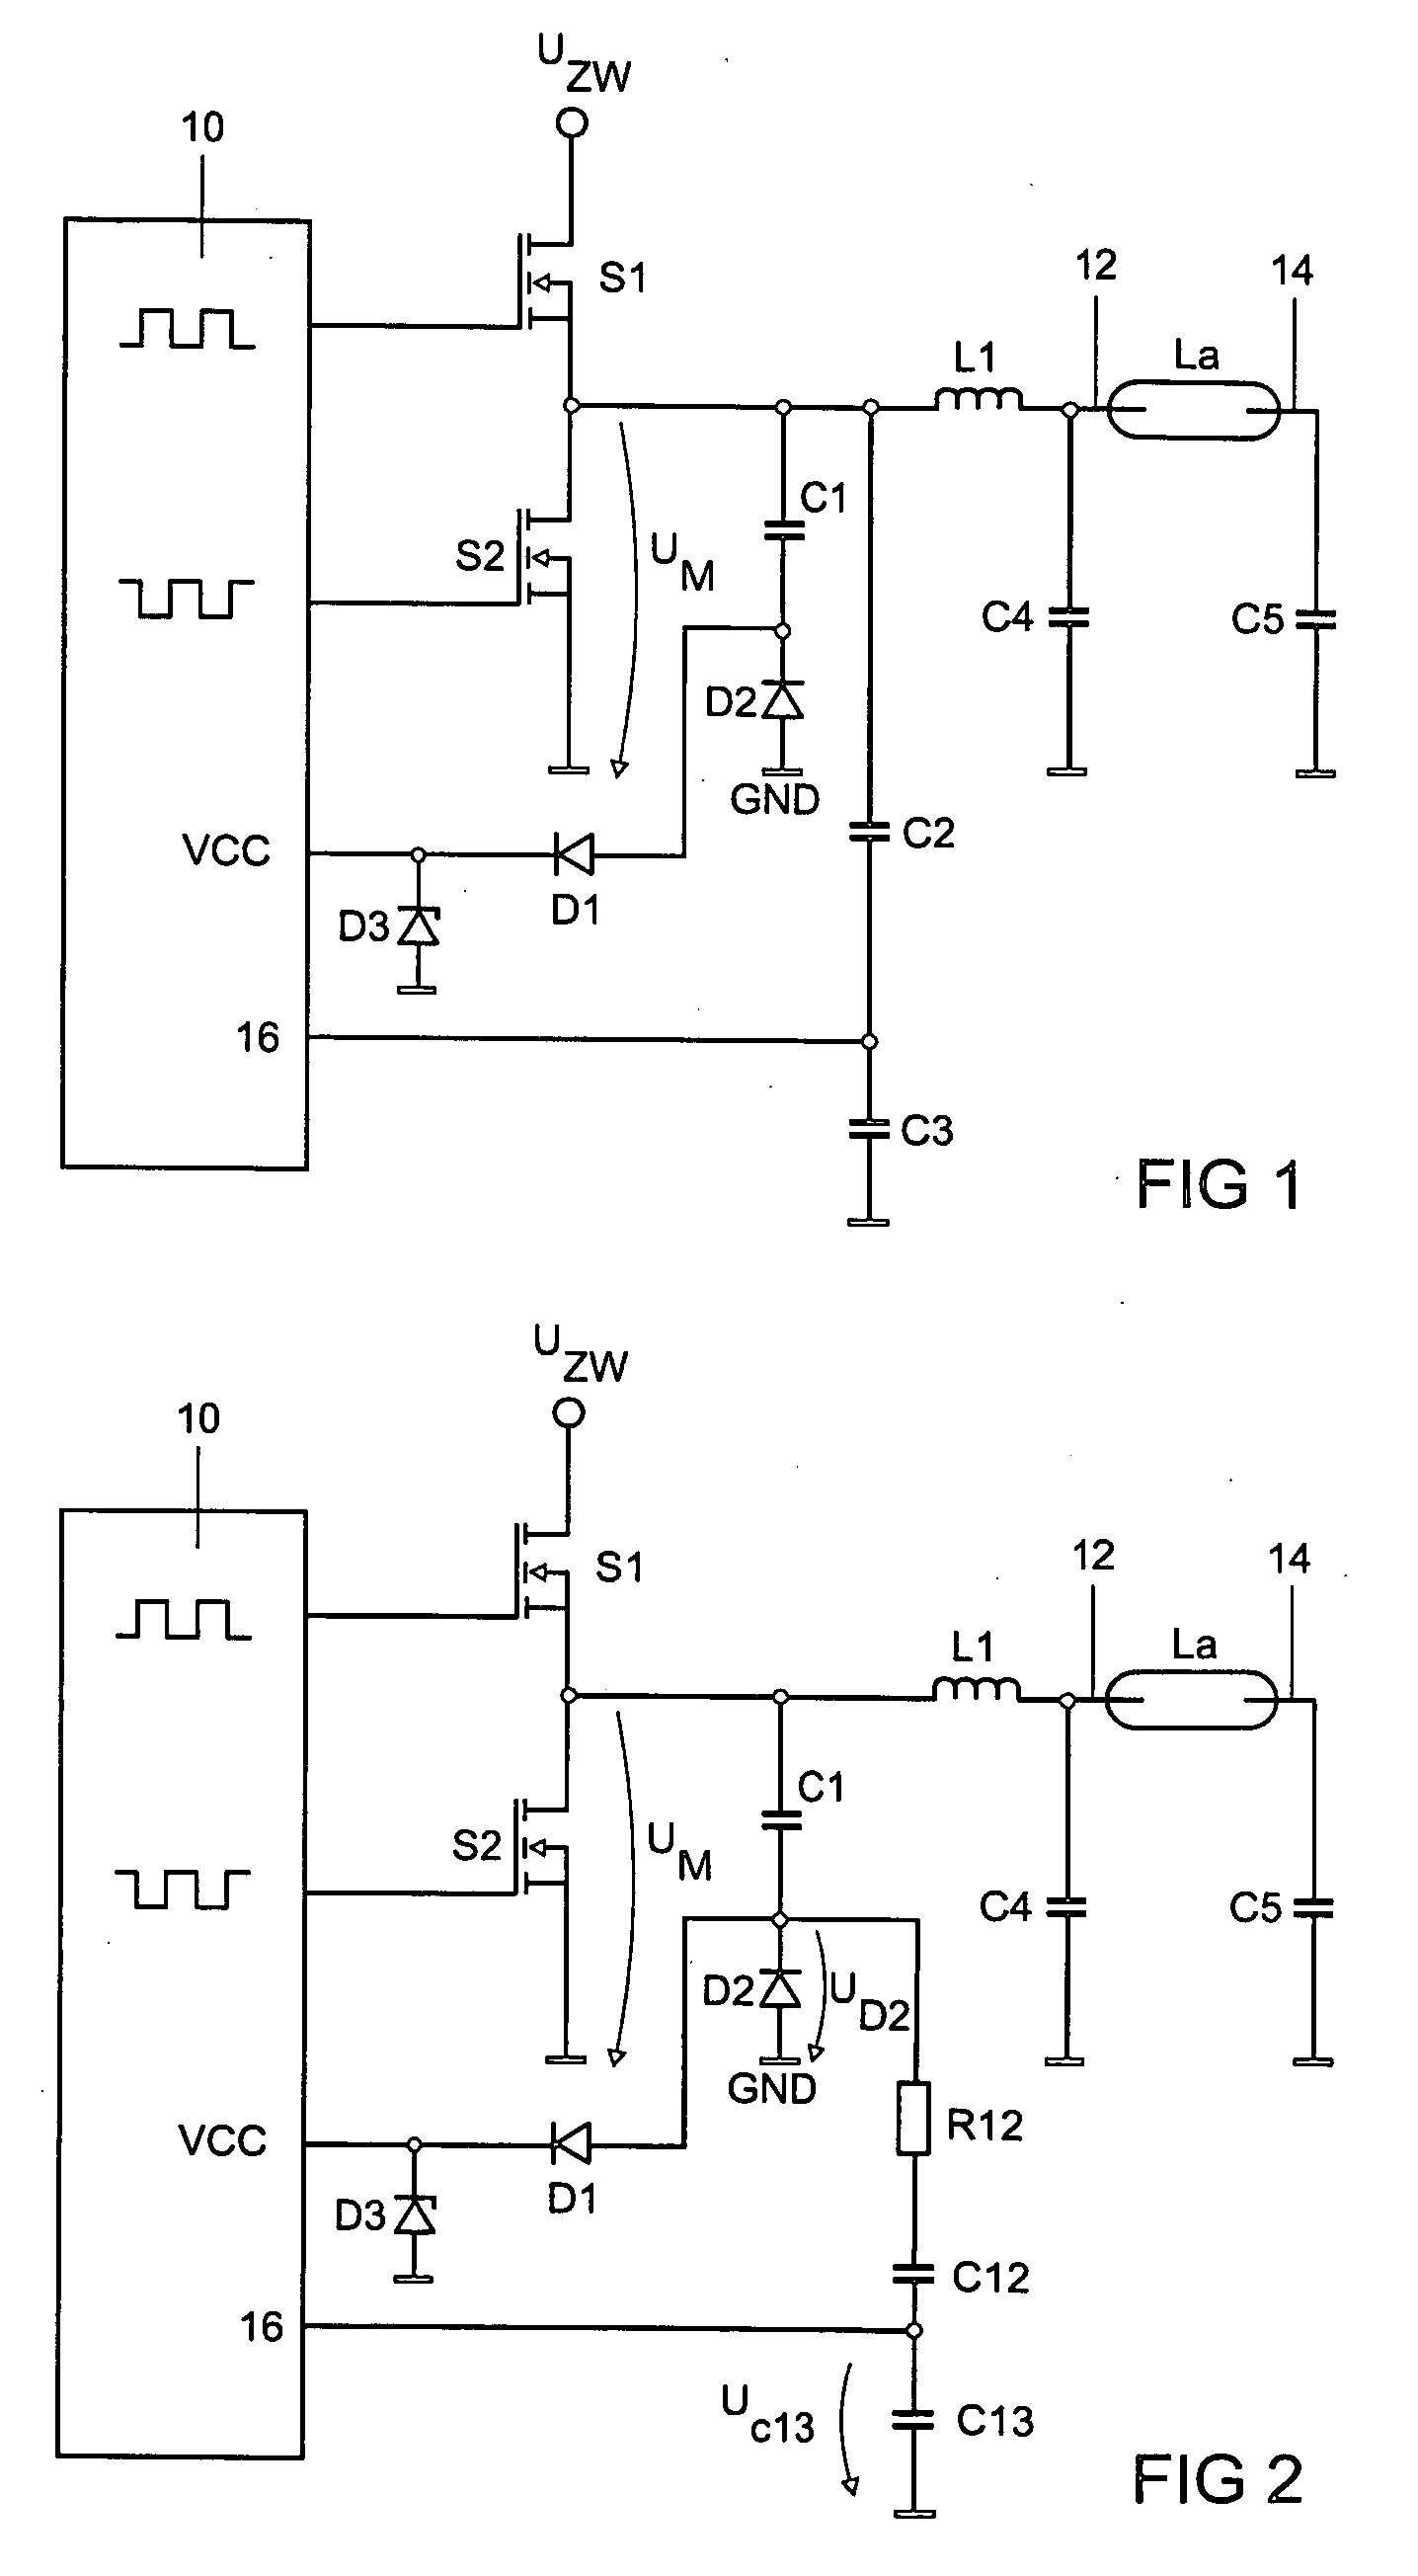 Electronic ballast for a lamp